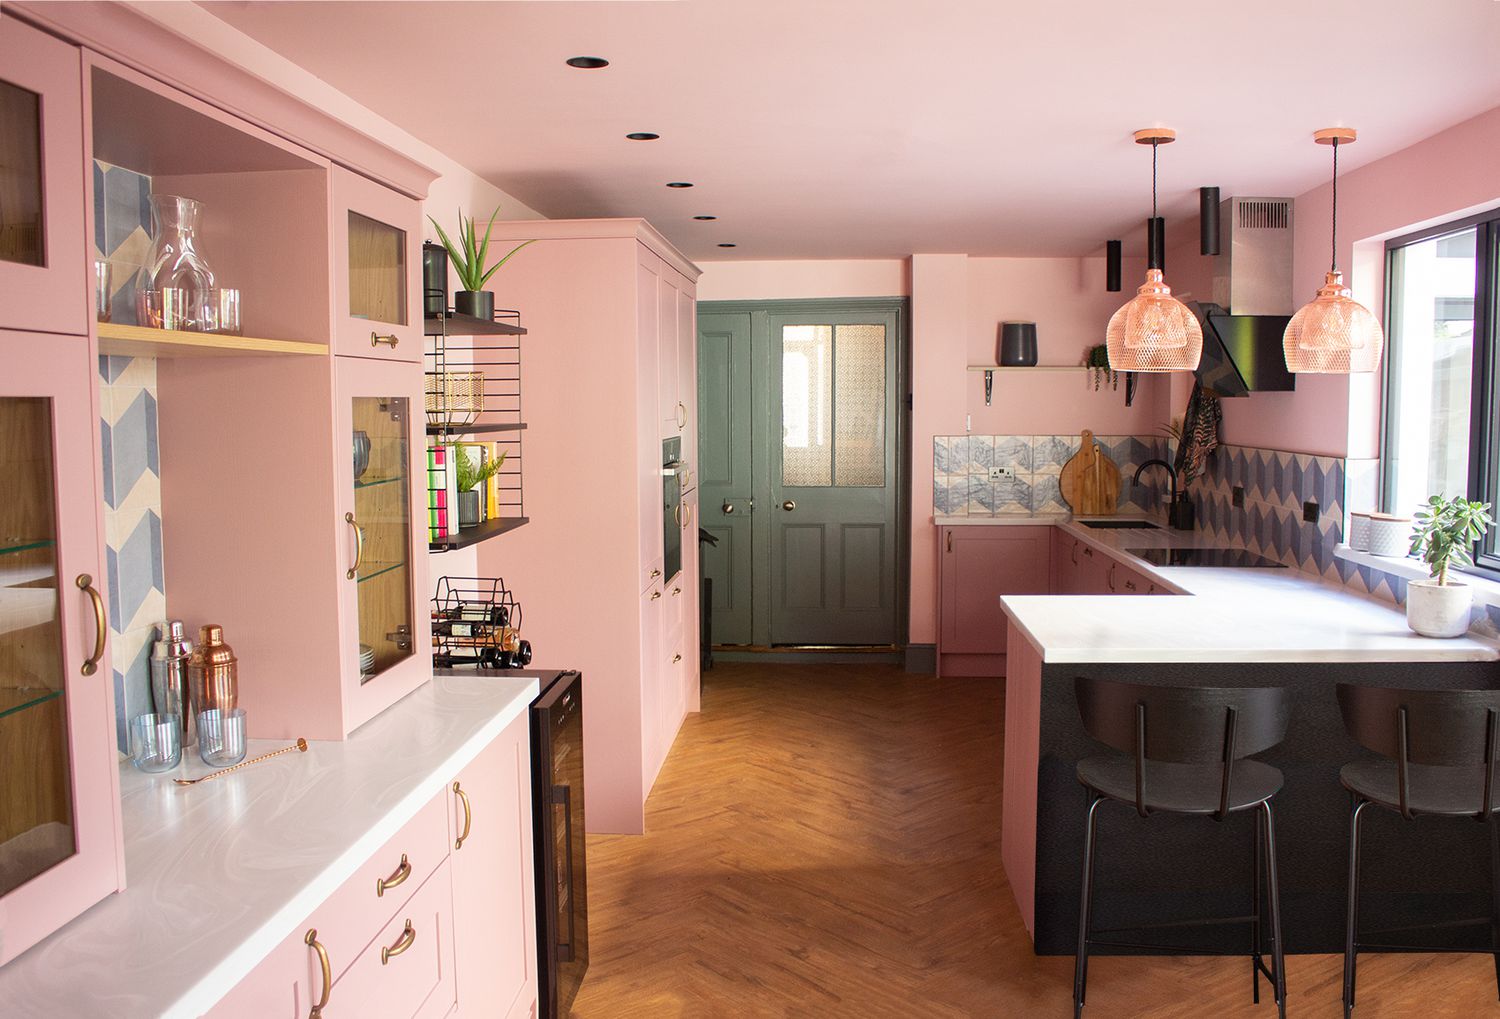 A photo of the pink and green kitchen, showing the bar stools and the view to the hallway.